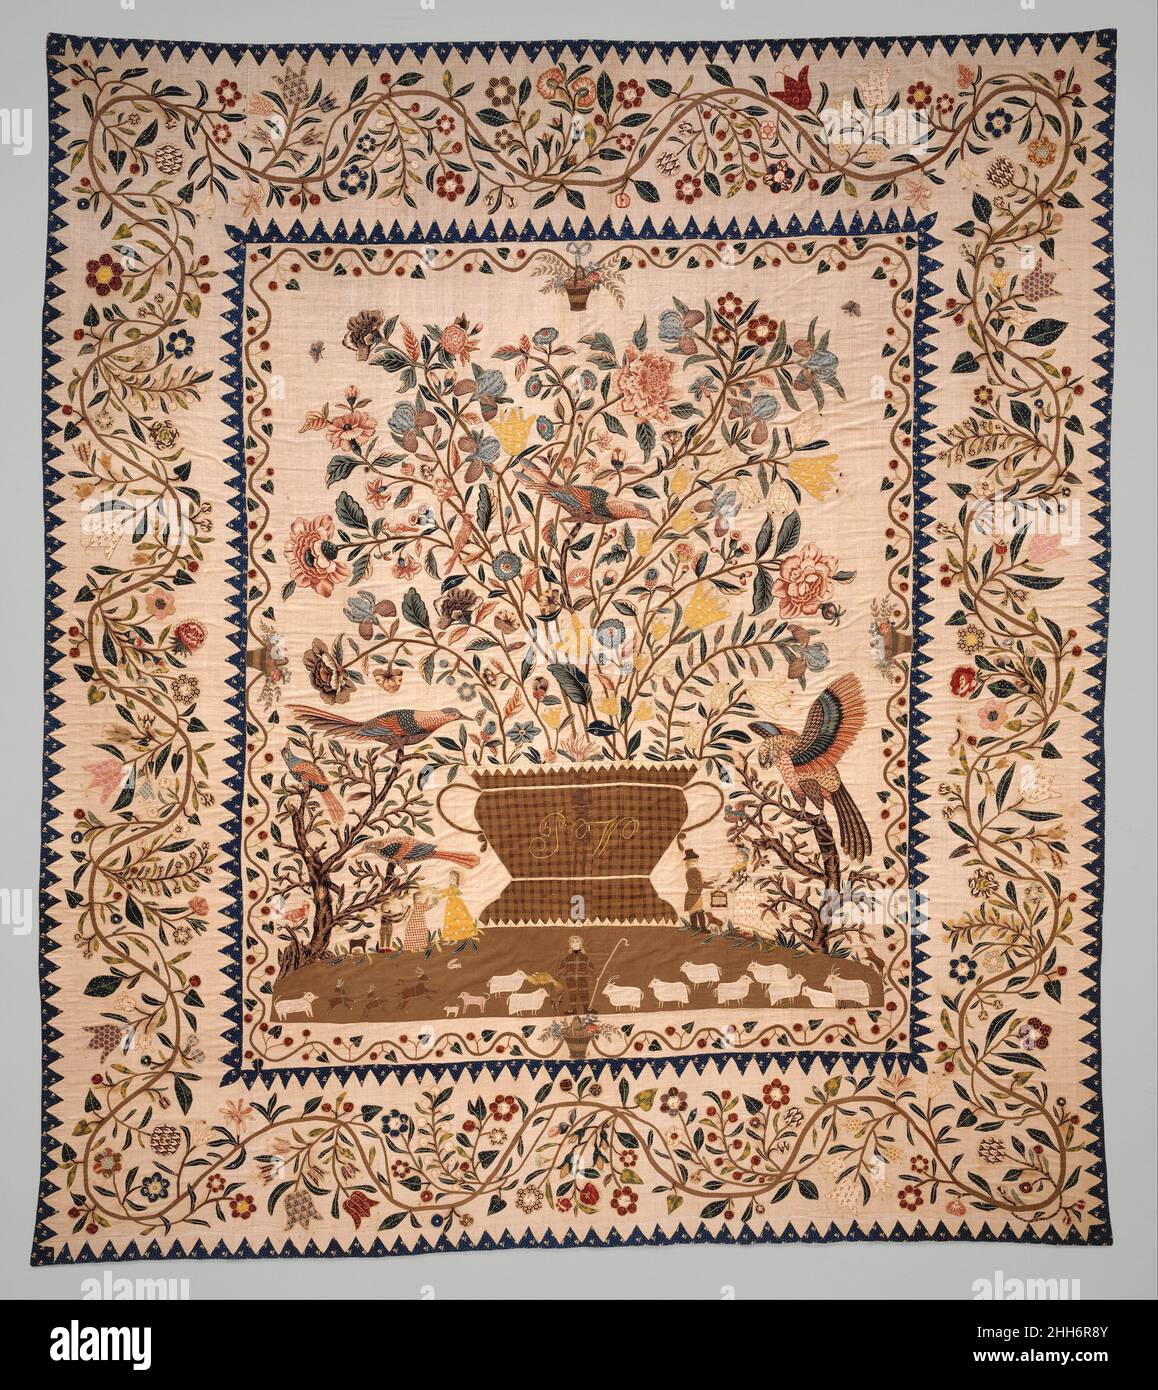 Phebe Warner Coverlet ca. 1803 Probably Sarah Furman Warner Williams American Made in about 1803 for Phebe Warner of New York, this bedcover's design relates more closely to eighteenth-century sources than to those of the nineteenth century. The maker was influenced by the central flowering-tree motif common to popular imported Indian bed hangings, called 'palampores,' as well as by the pastoral landscape needlework pictures often worked by young women. The coverlet's linen ground is appliquéd with large-patterned cotton chintzes and printed linens, as well as smaller-patterned cotton calicos Stock Photo